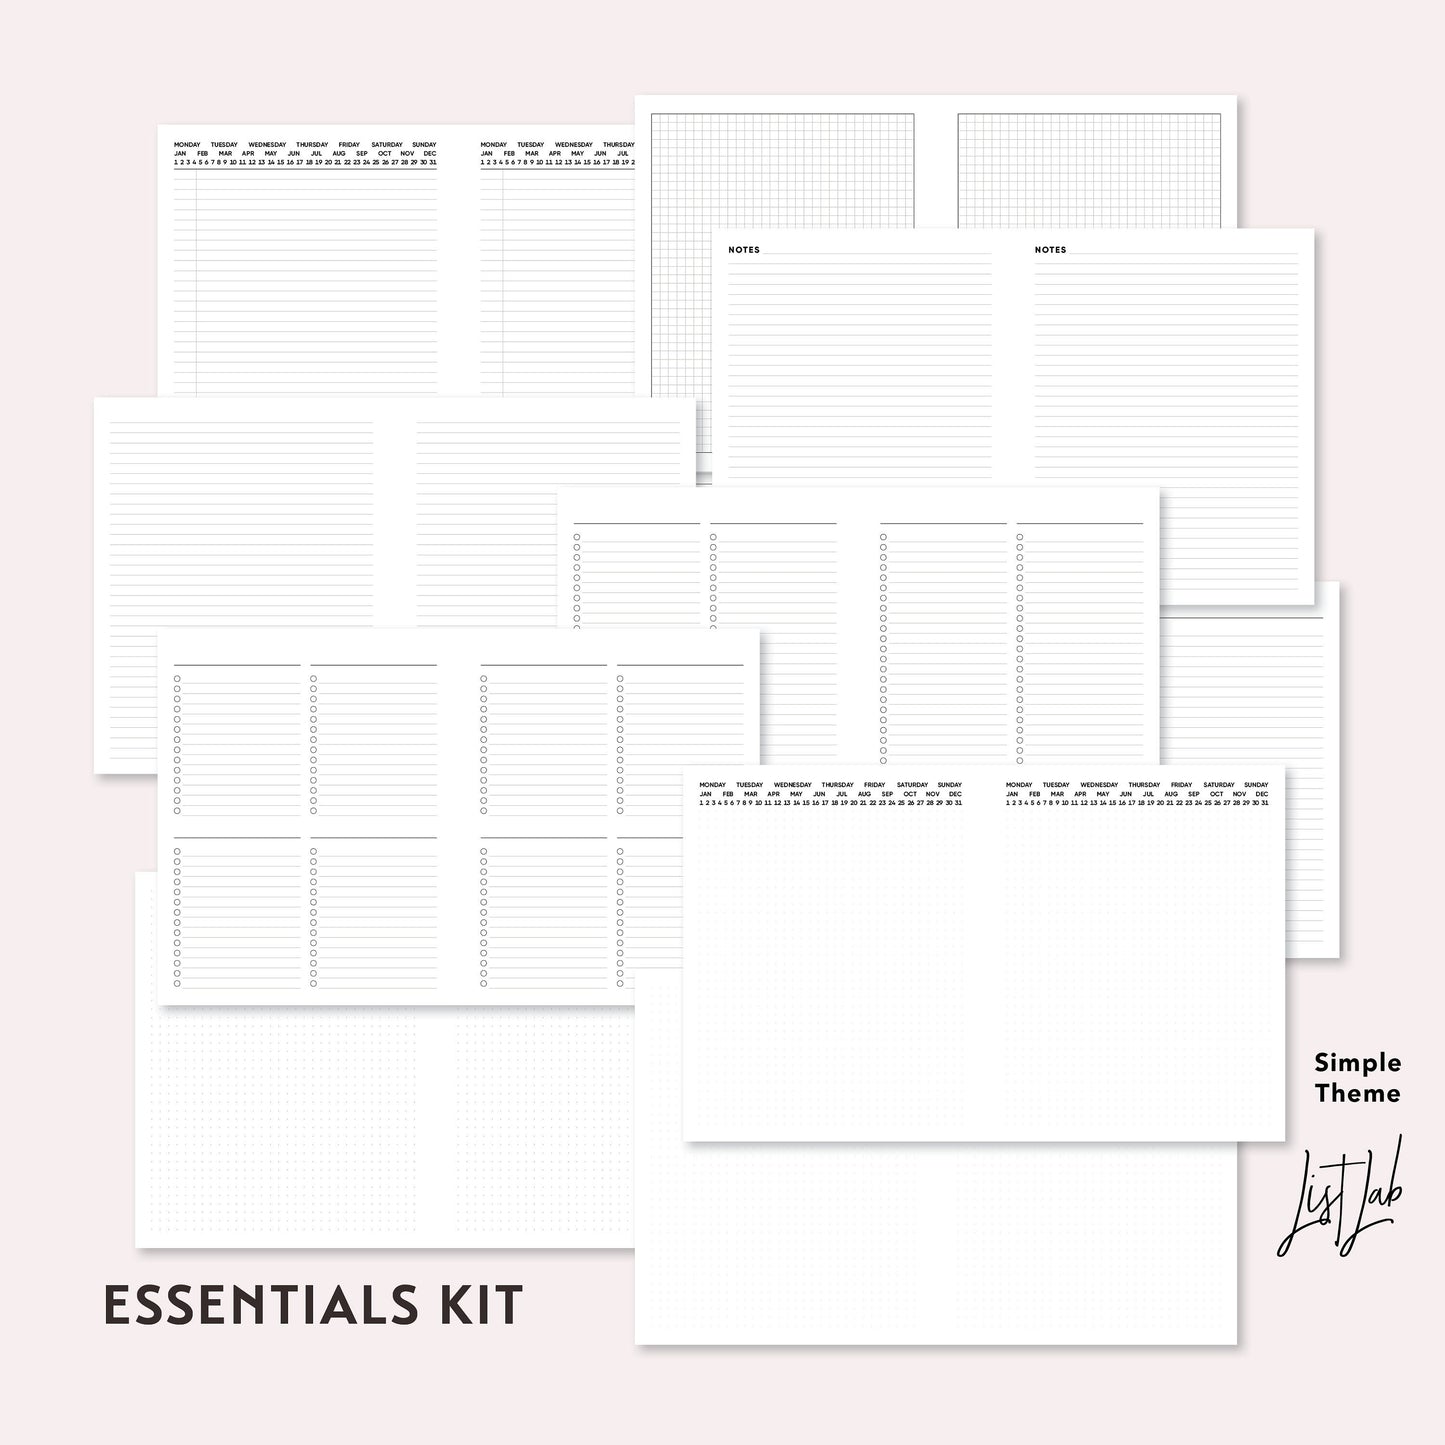 ECLP / A5 Wide Ring EVERYTHING BUNDLE Printable Insert Set